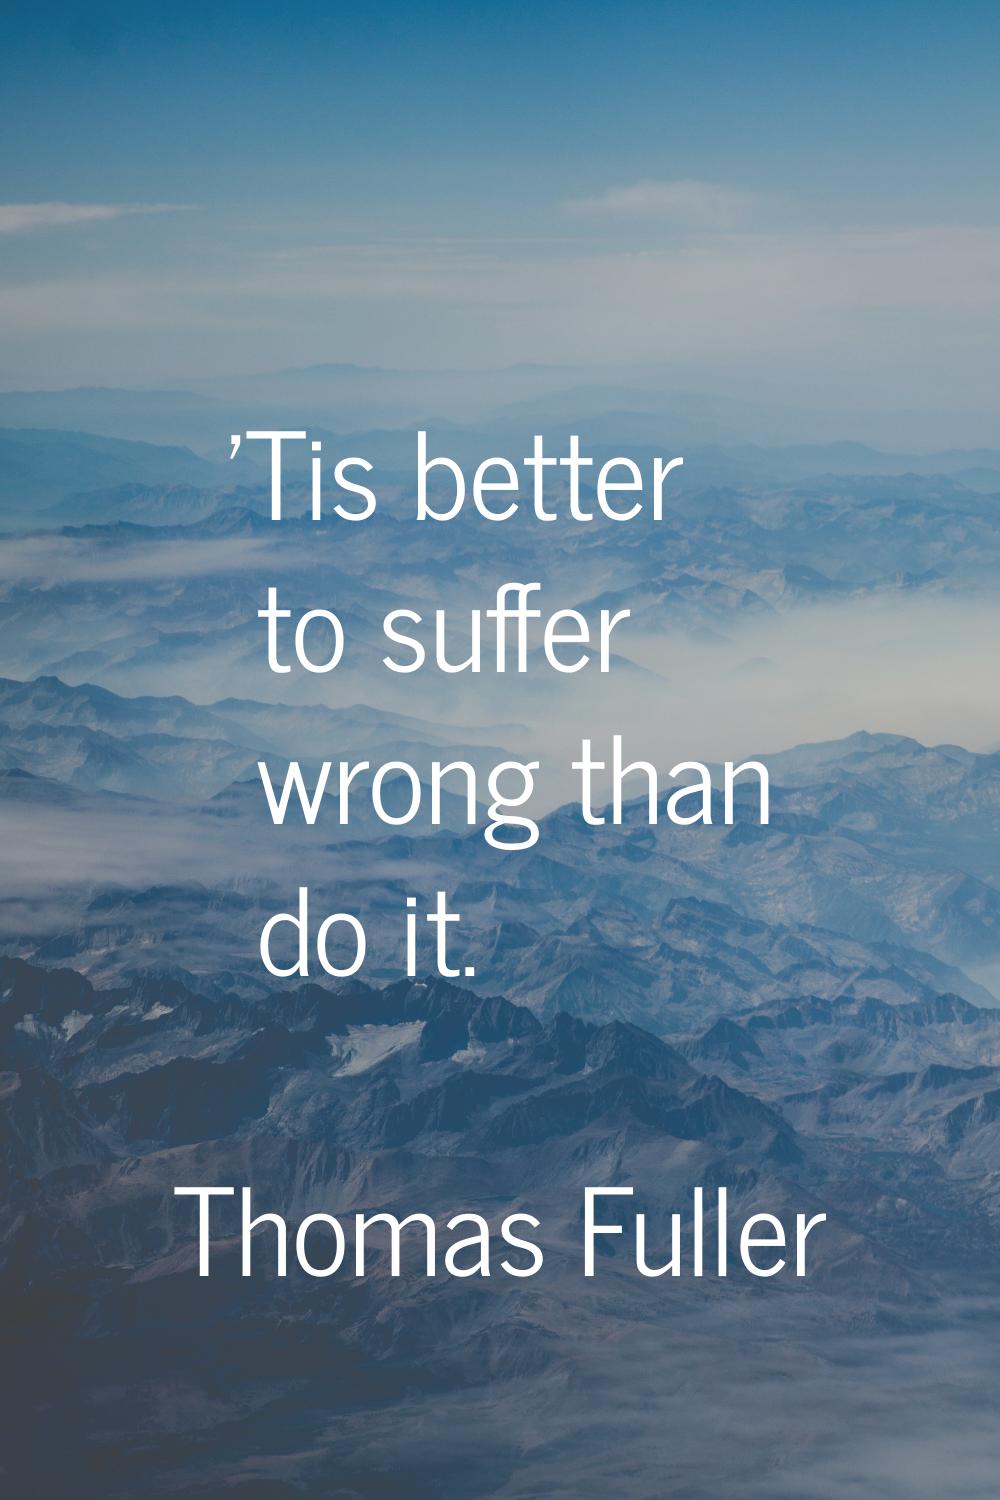 'Tis better to suffer wrong than do it.